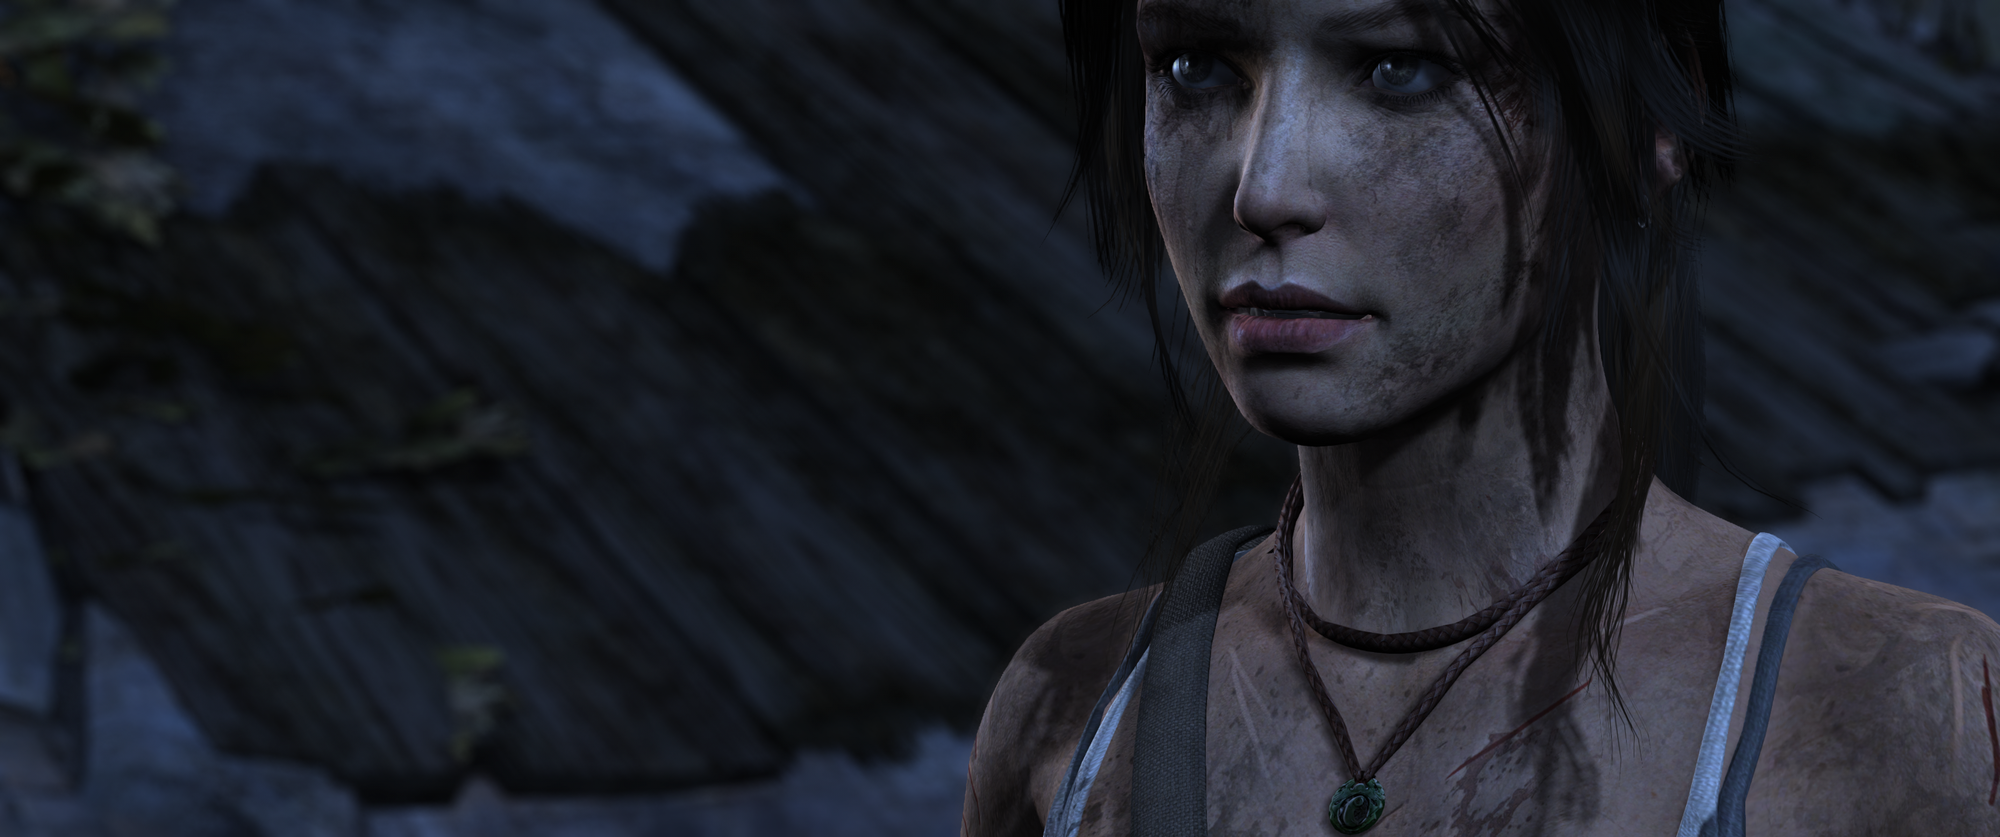 TombRaider_2018_07_25_18_25_24_857.png